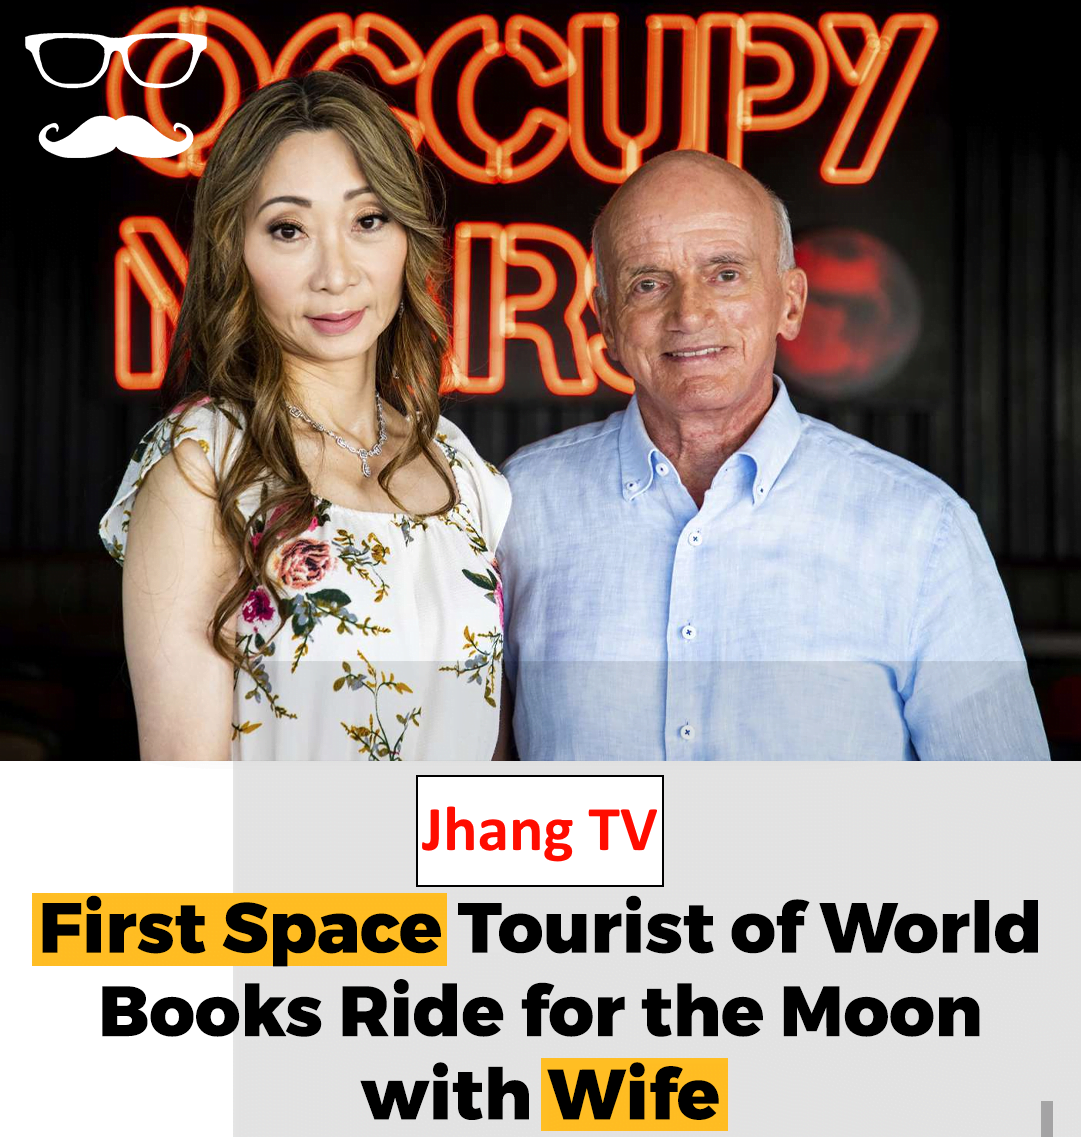 Elon Musk's SpaceX said on Wednesday that the world's first space tourist Dennis Tito and his wife Akiko 